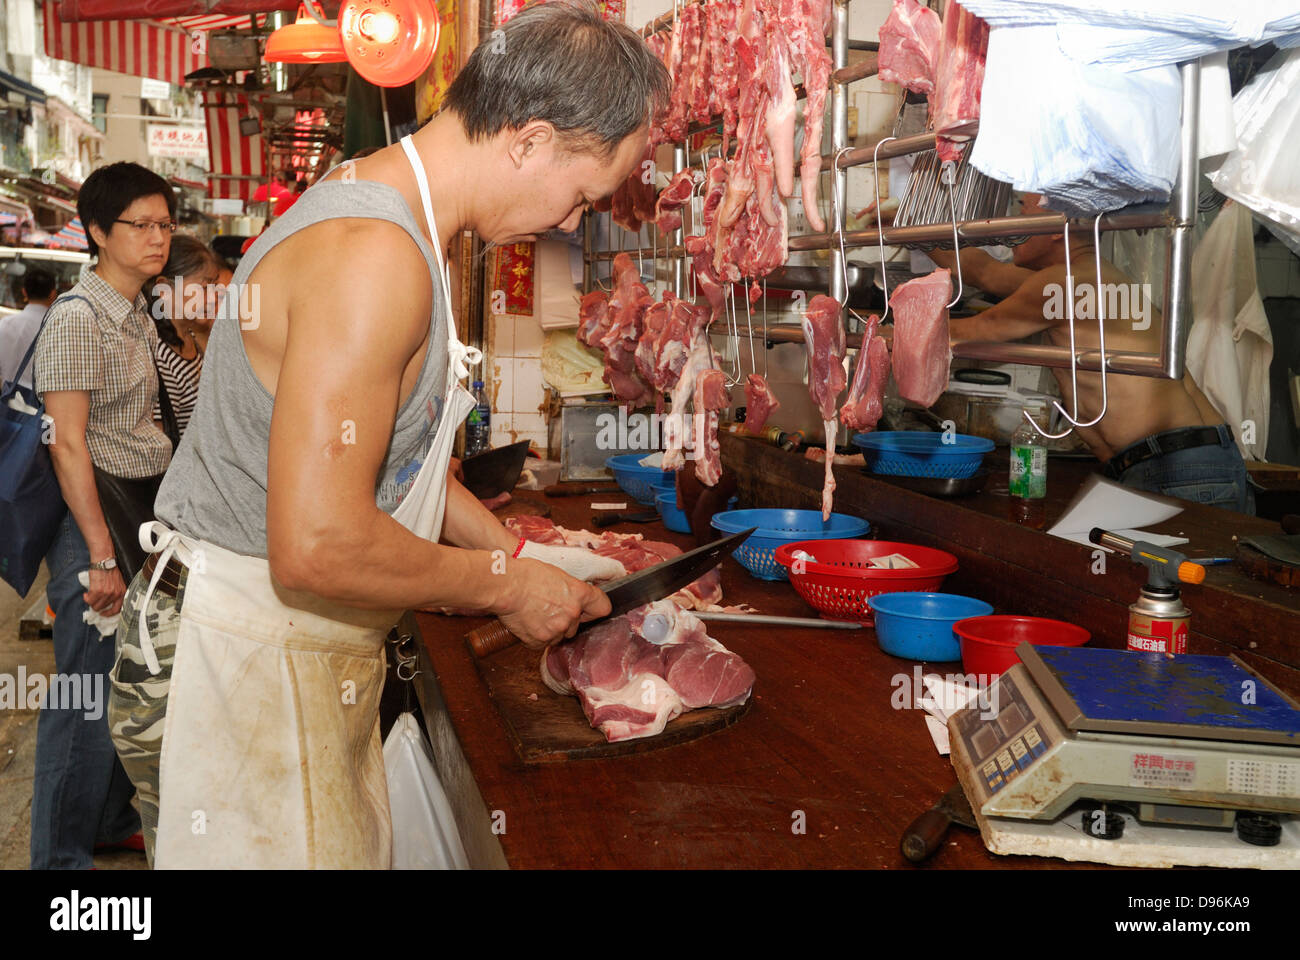 A Chinese butcher prepares meat in his shop in a village in China